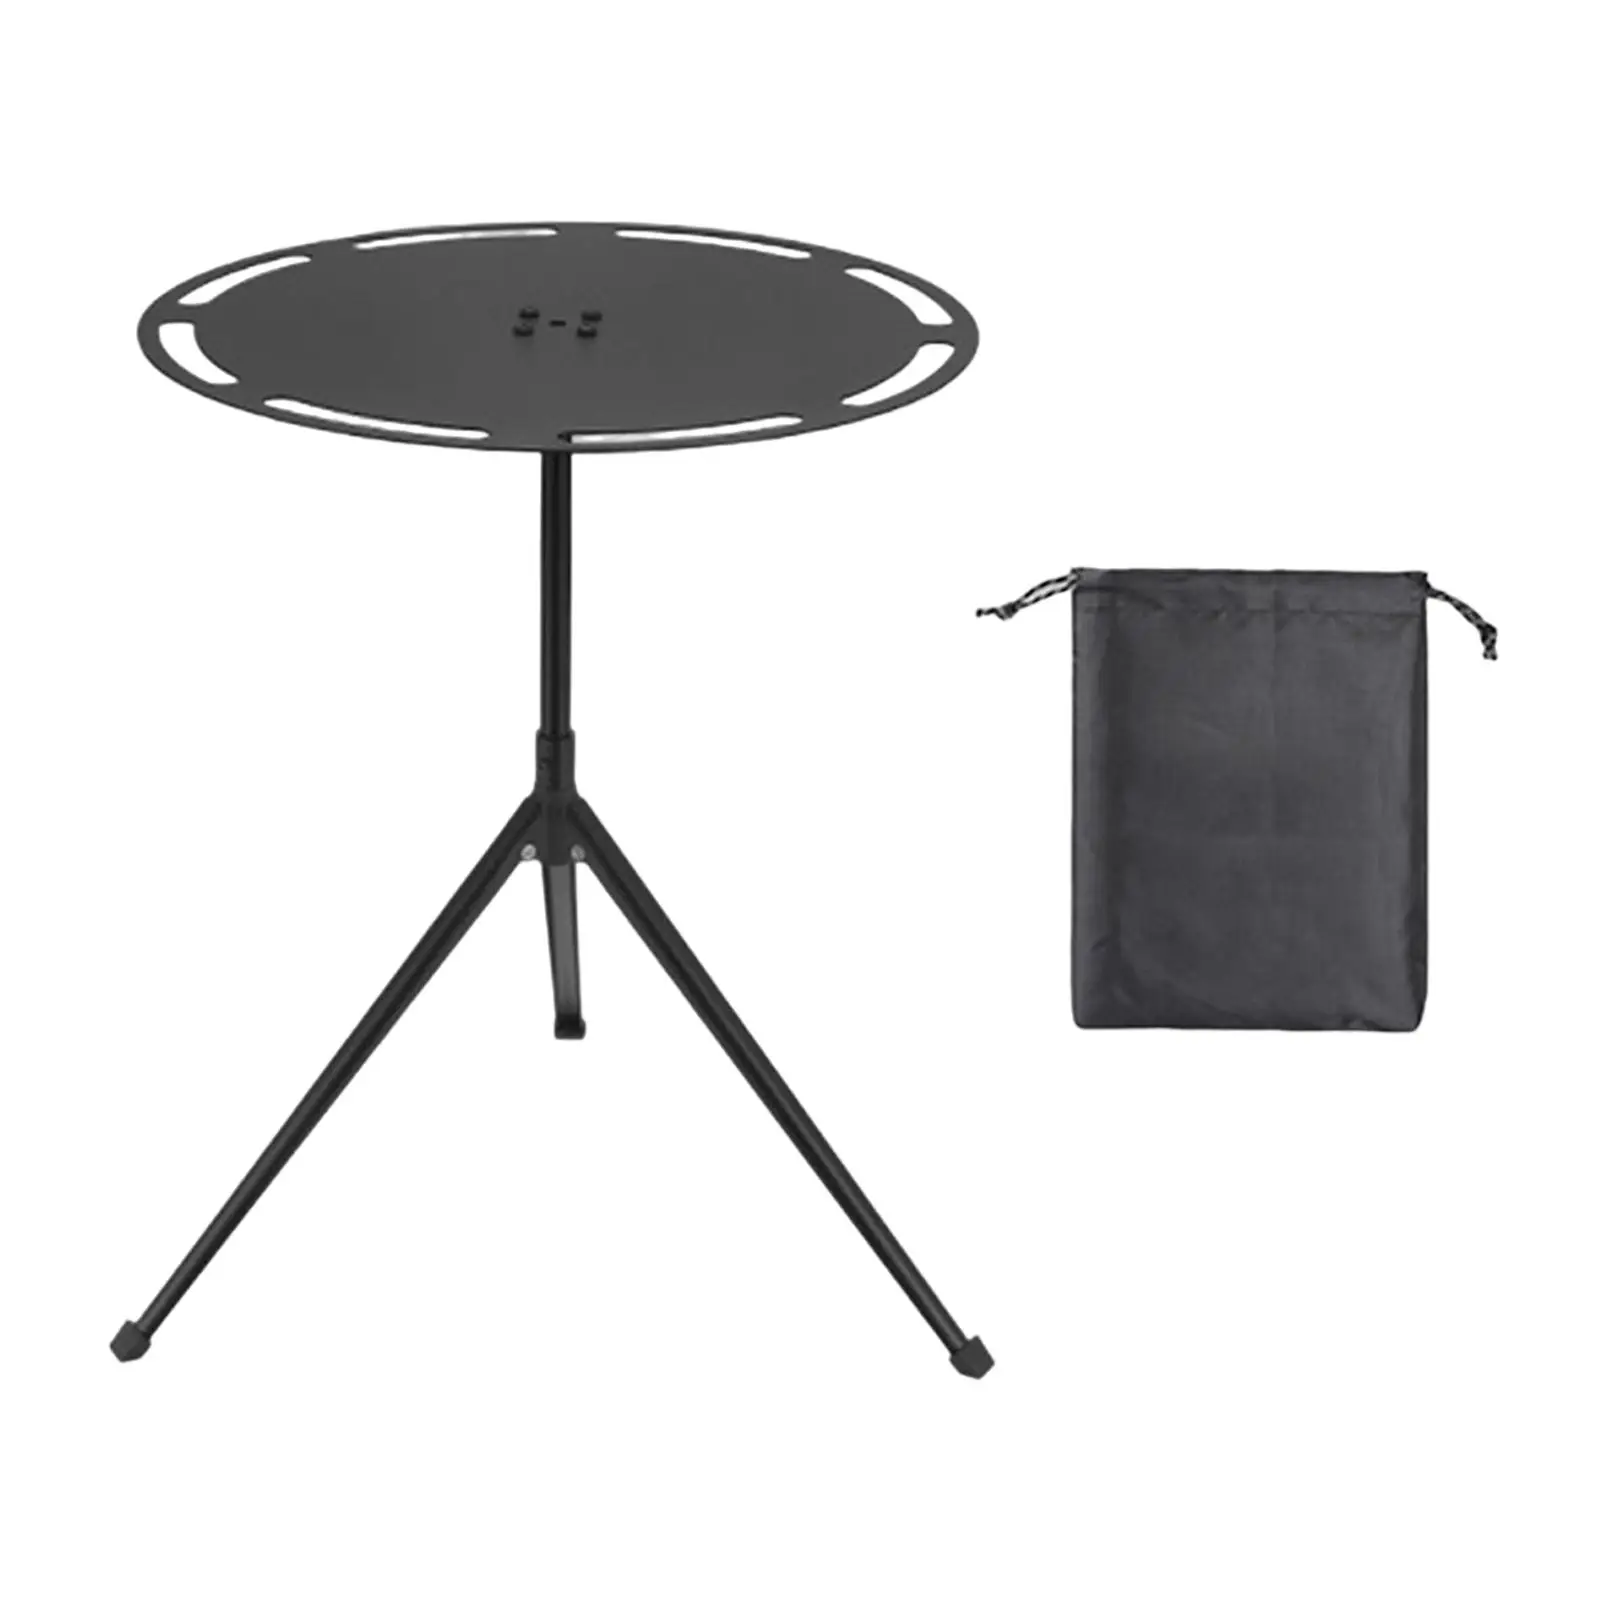 Camping Table Coffee Table Travel Table Portable Mini Table with Carrying Bag for Outdoor Mountaintop Fishing BBQ Backpacking